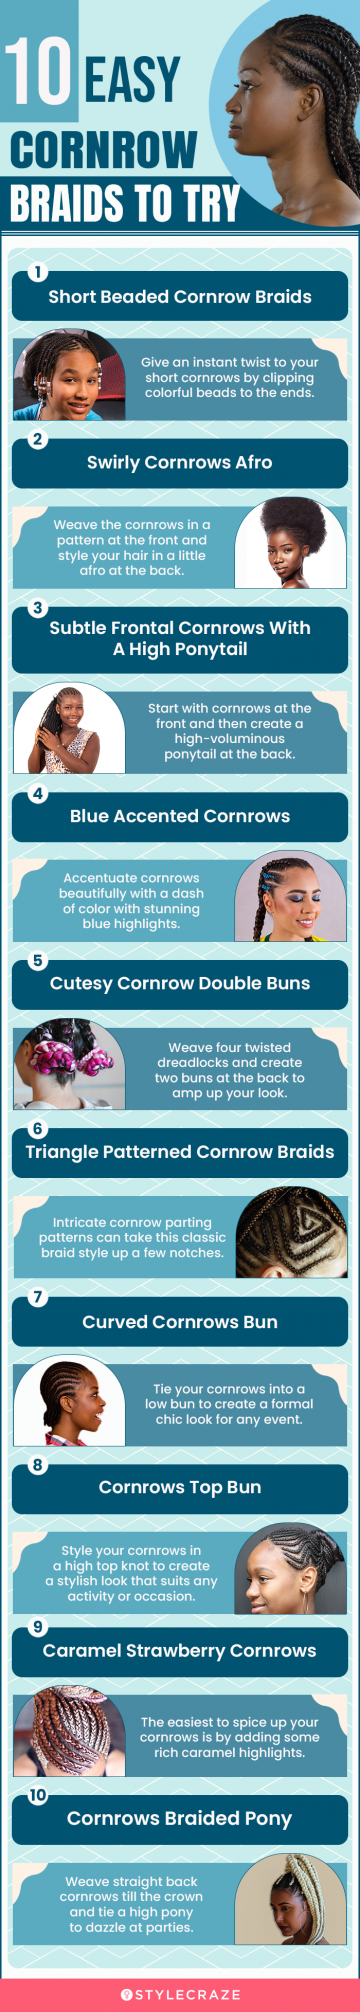 10 easy cornrow braids to try (infographic) 